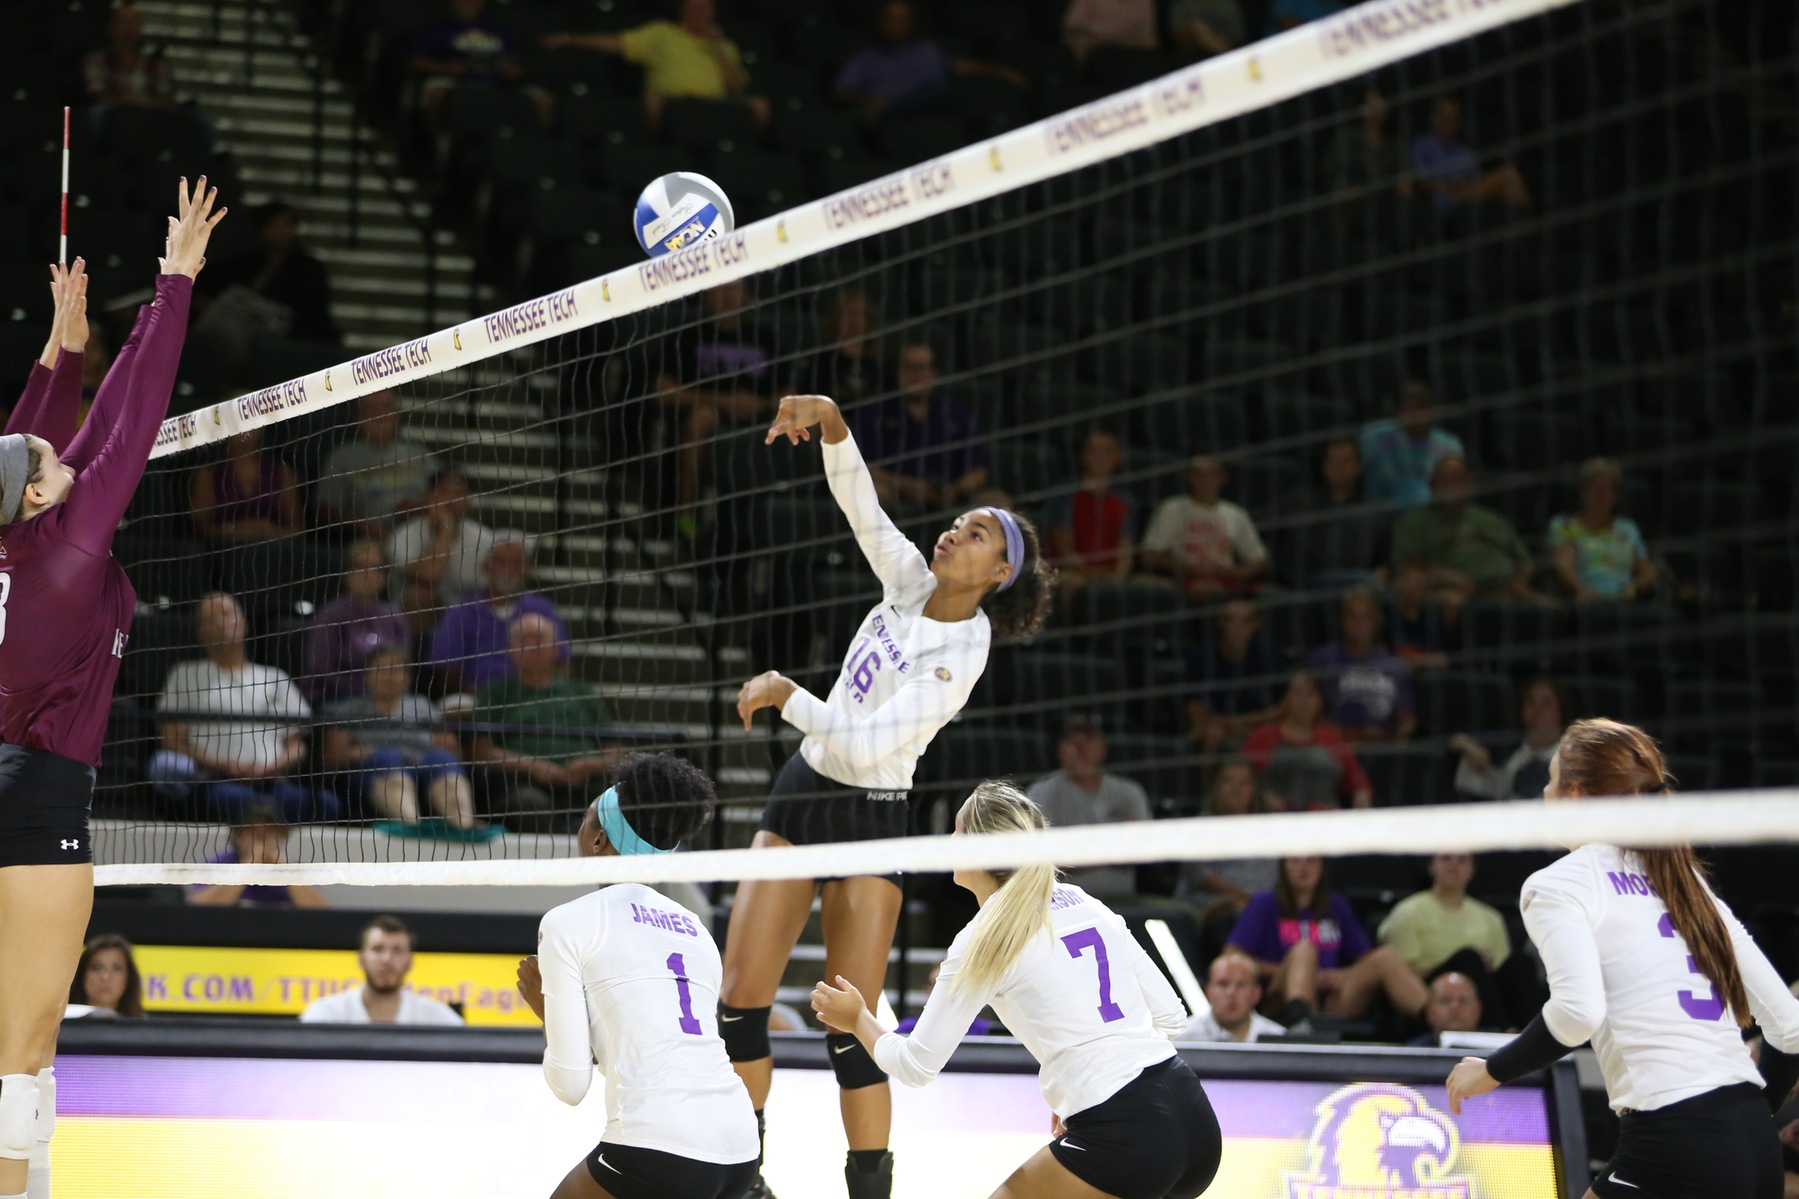 Sophomore Rachel Thomas picked up six of the Golden Eagles' 41 team kills in their season-opening win.